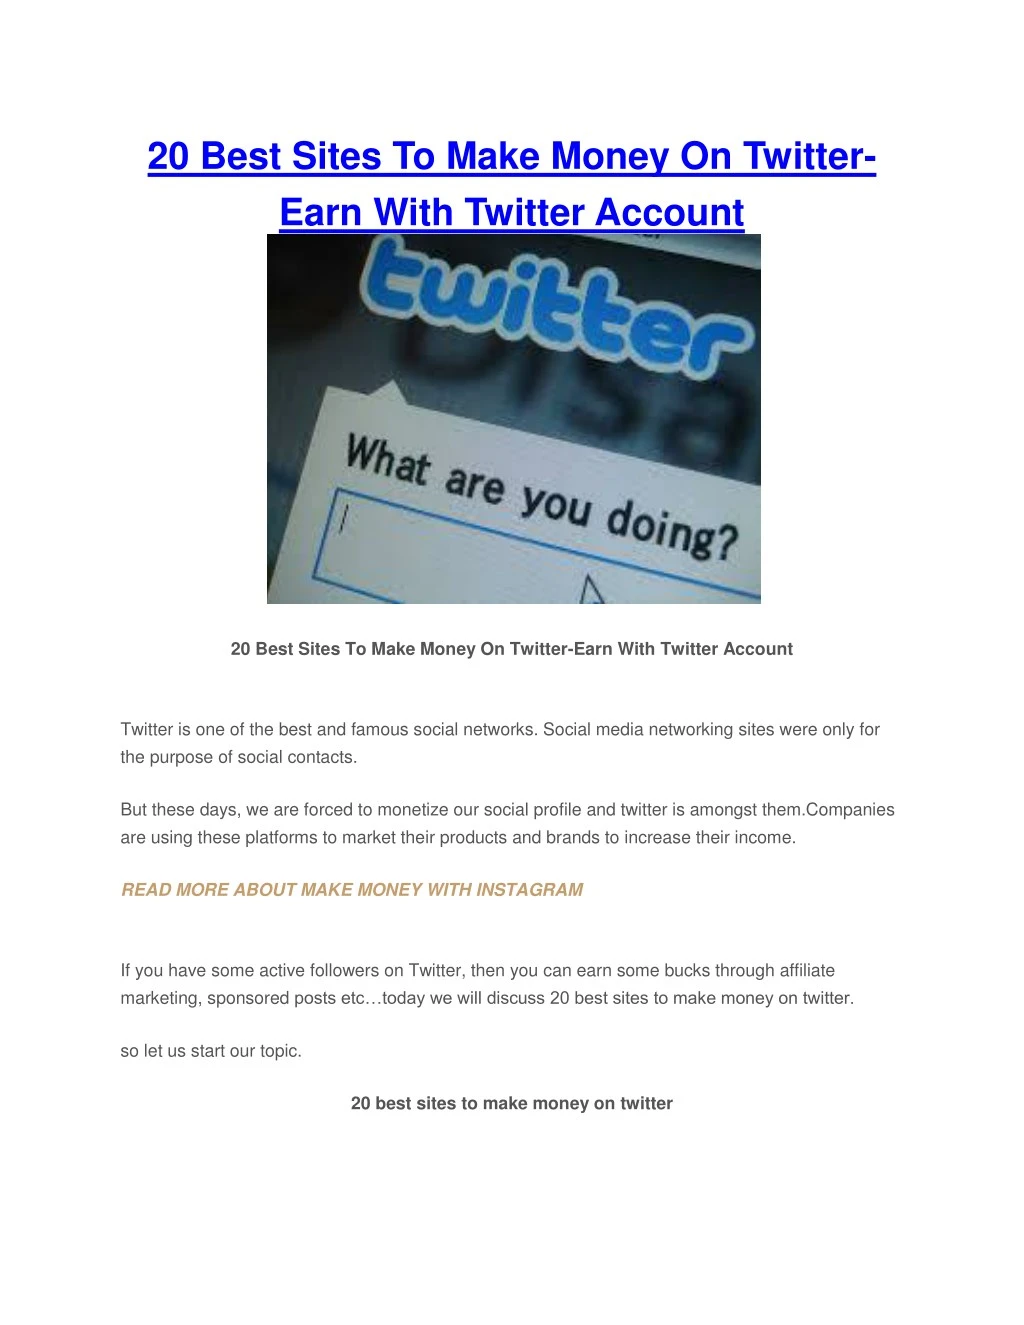 20 best sites to make money on twitter earn with